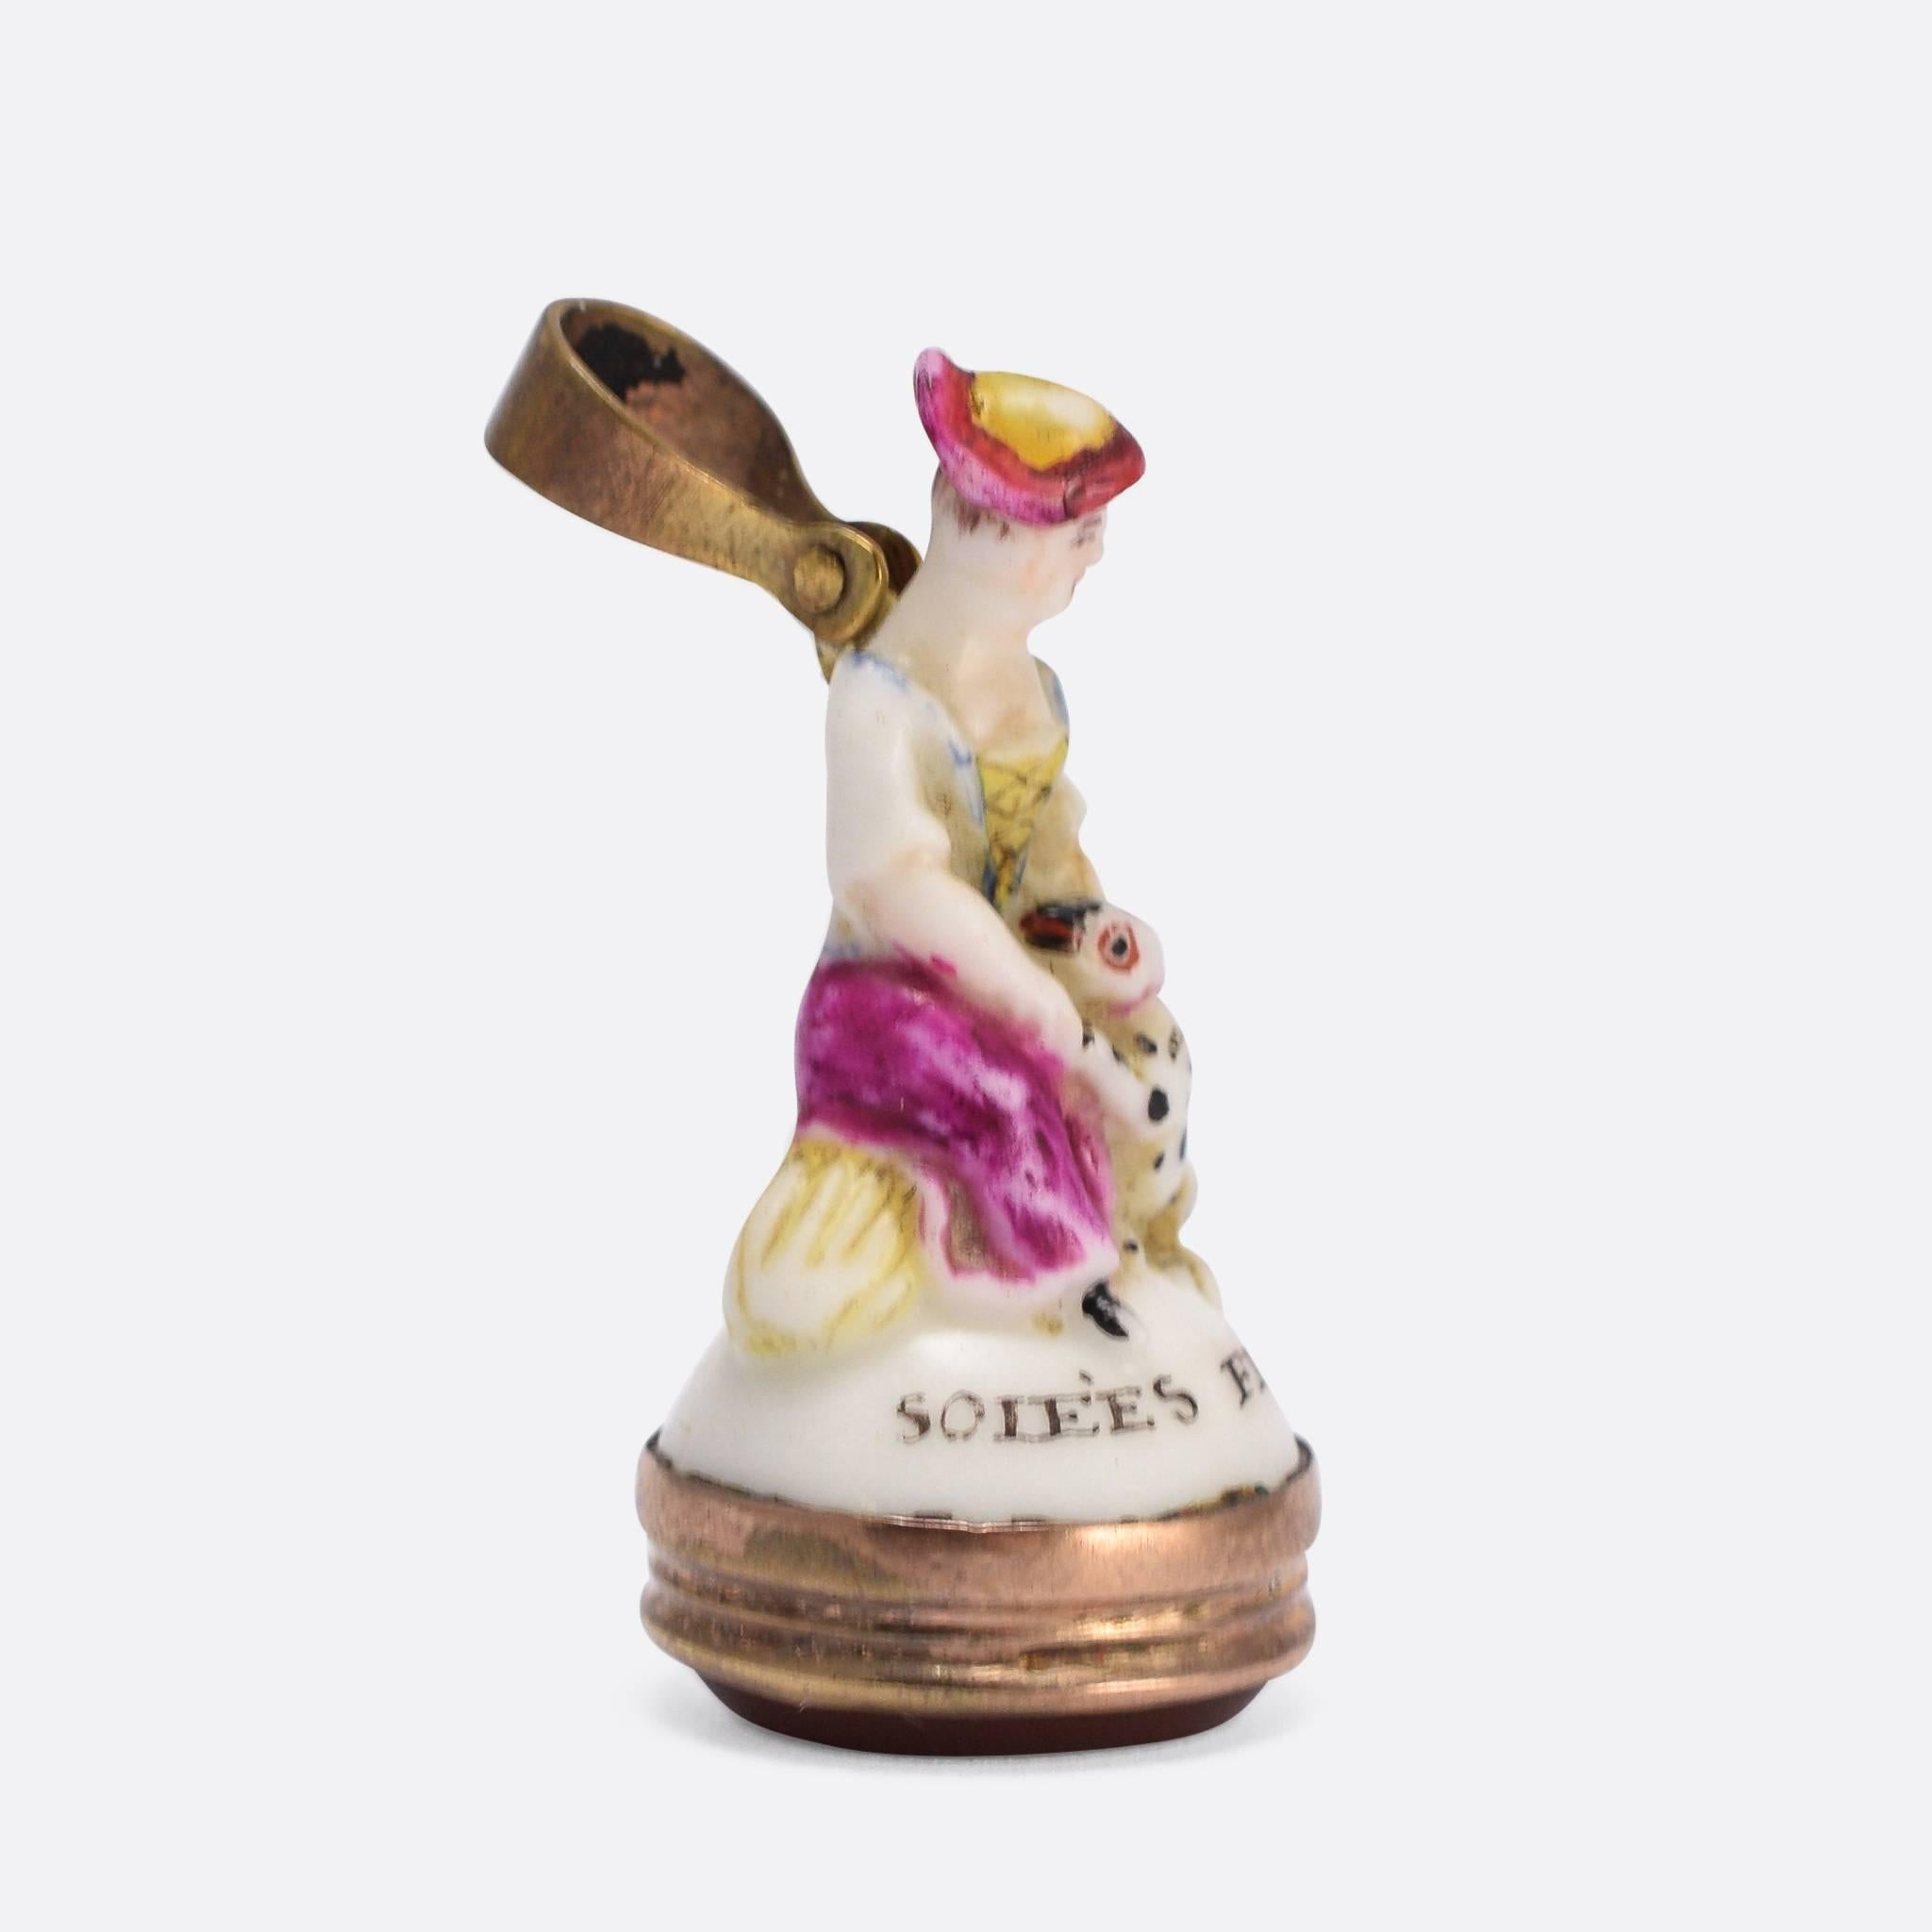 An original 18th Century porcelain Derby Chelsea period fob seal. This particular piece features a lady and a Dalmatian puppy, and displays the vivid colouring typical of the Derby factory. The design is older, however, originating from the earlier